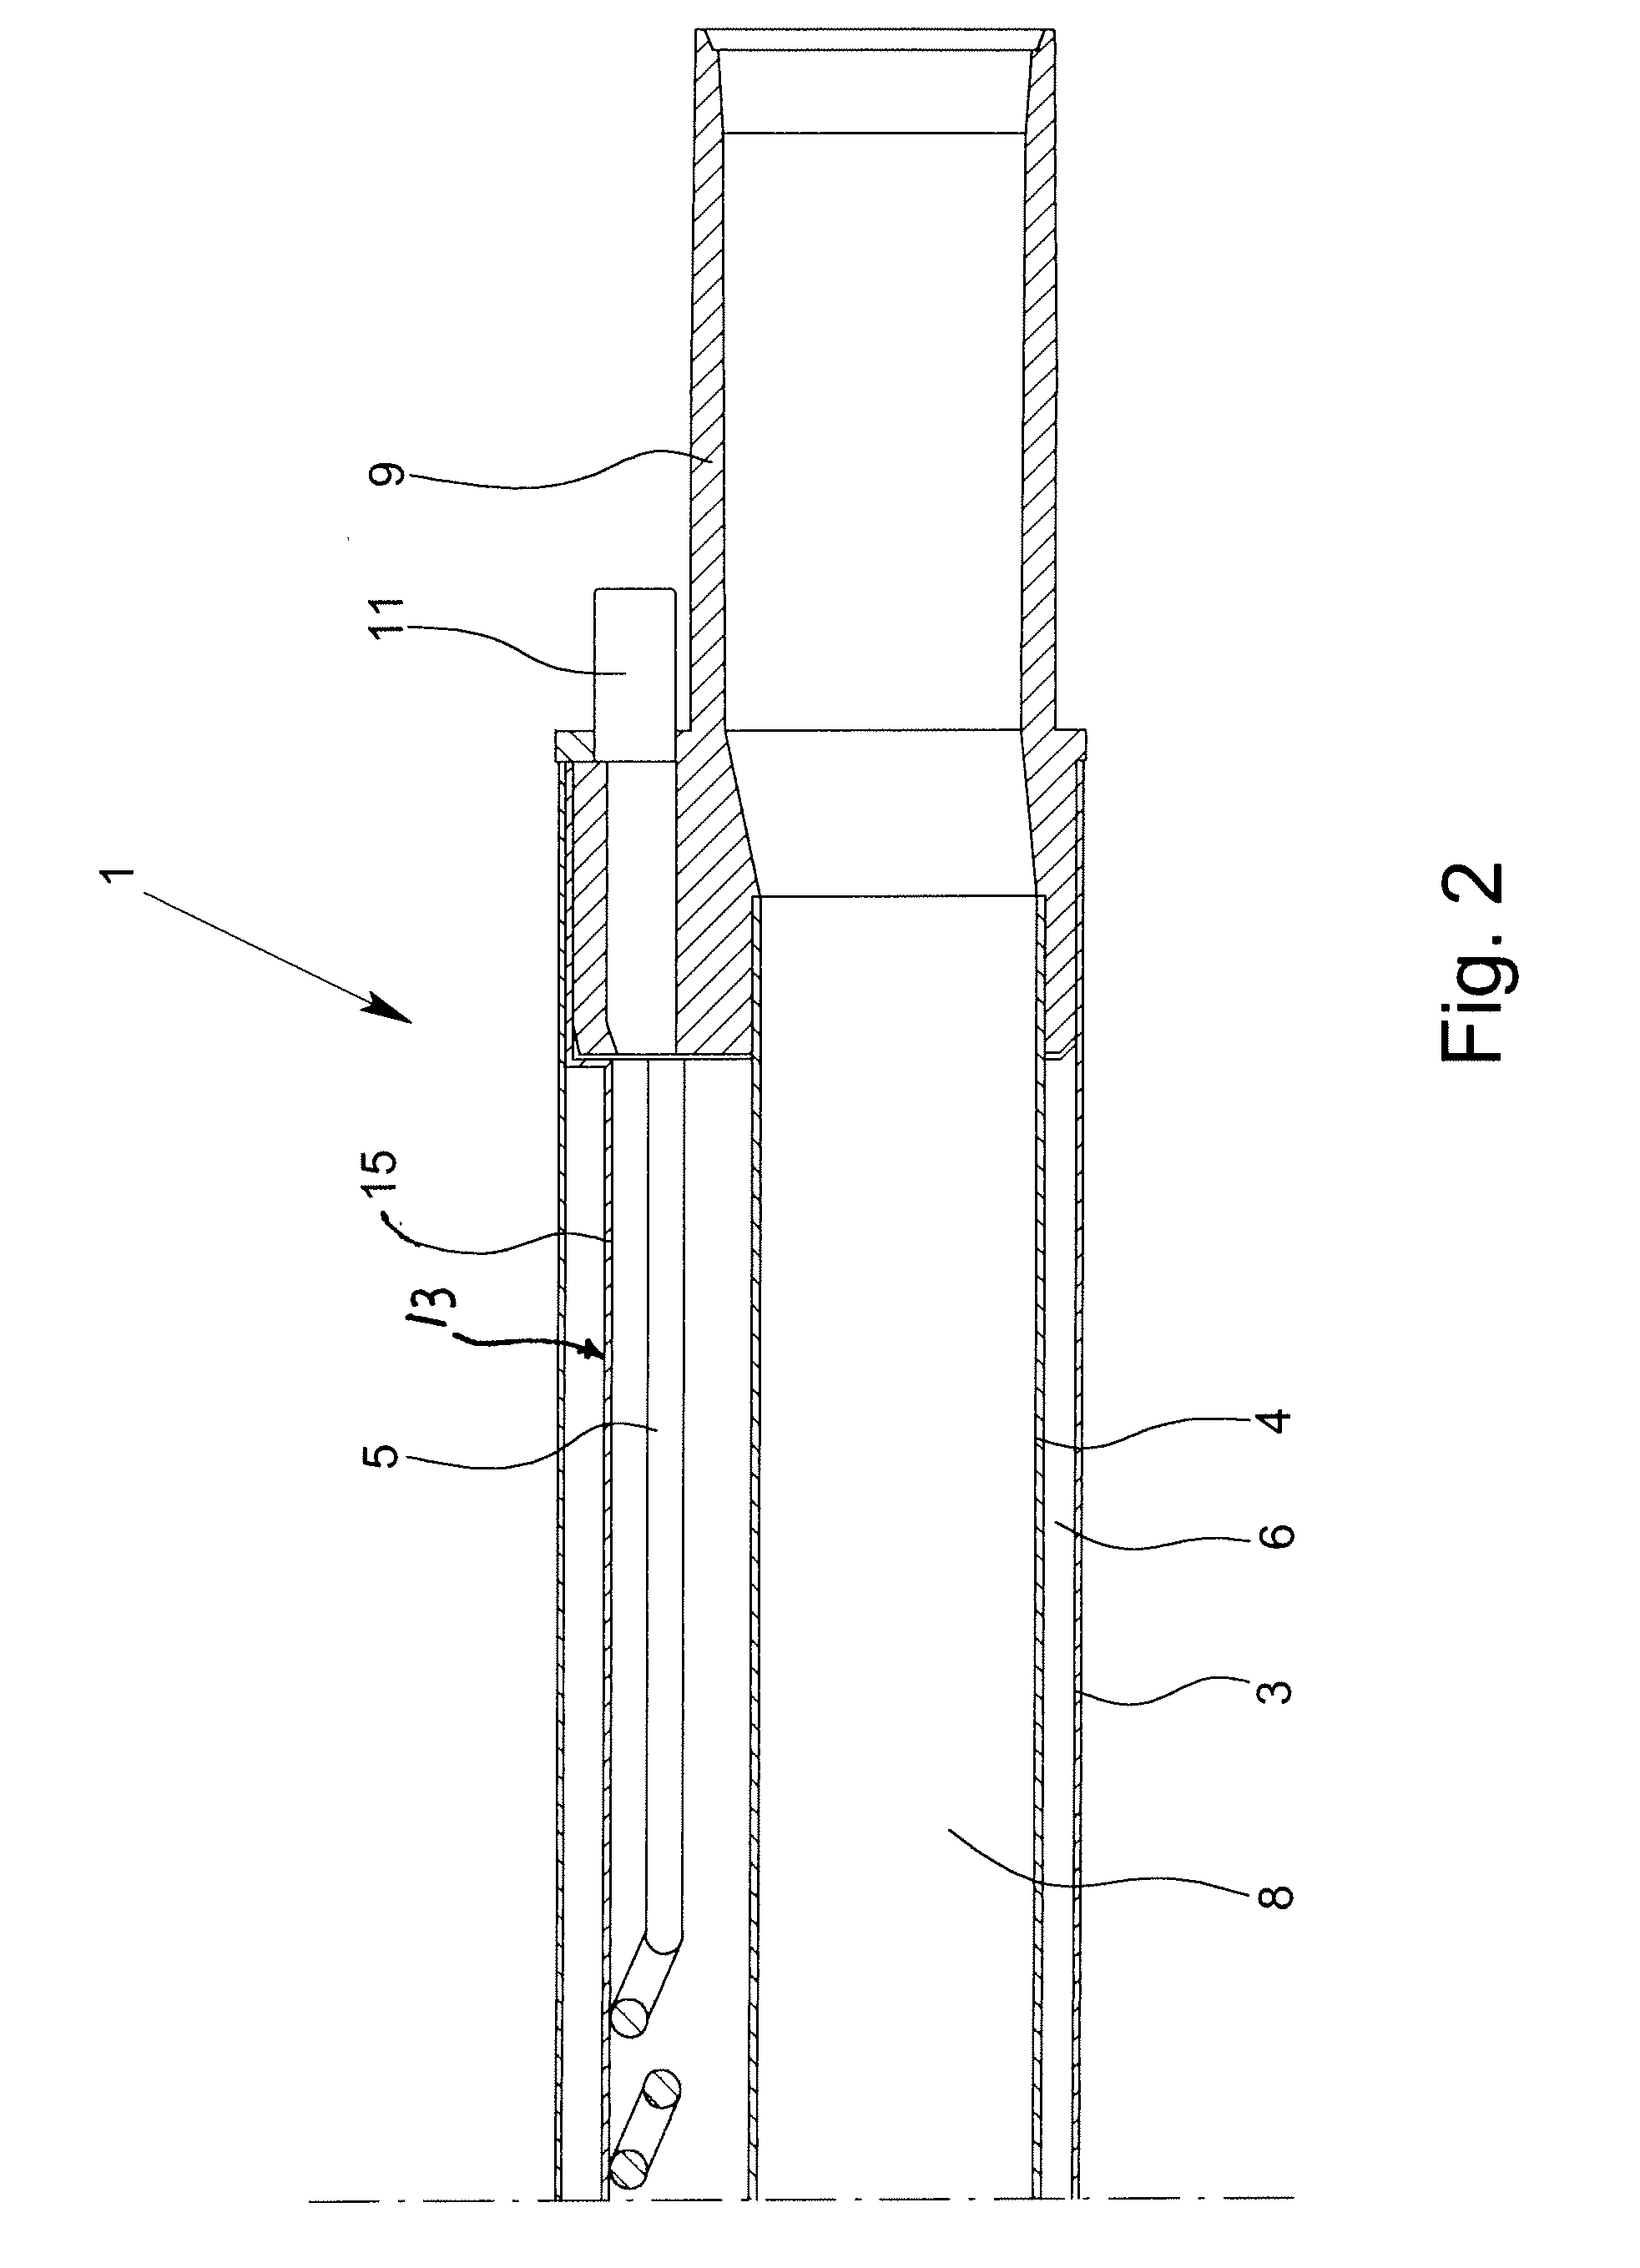 Telescoping tube system for a vacuum cleaner